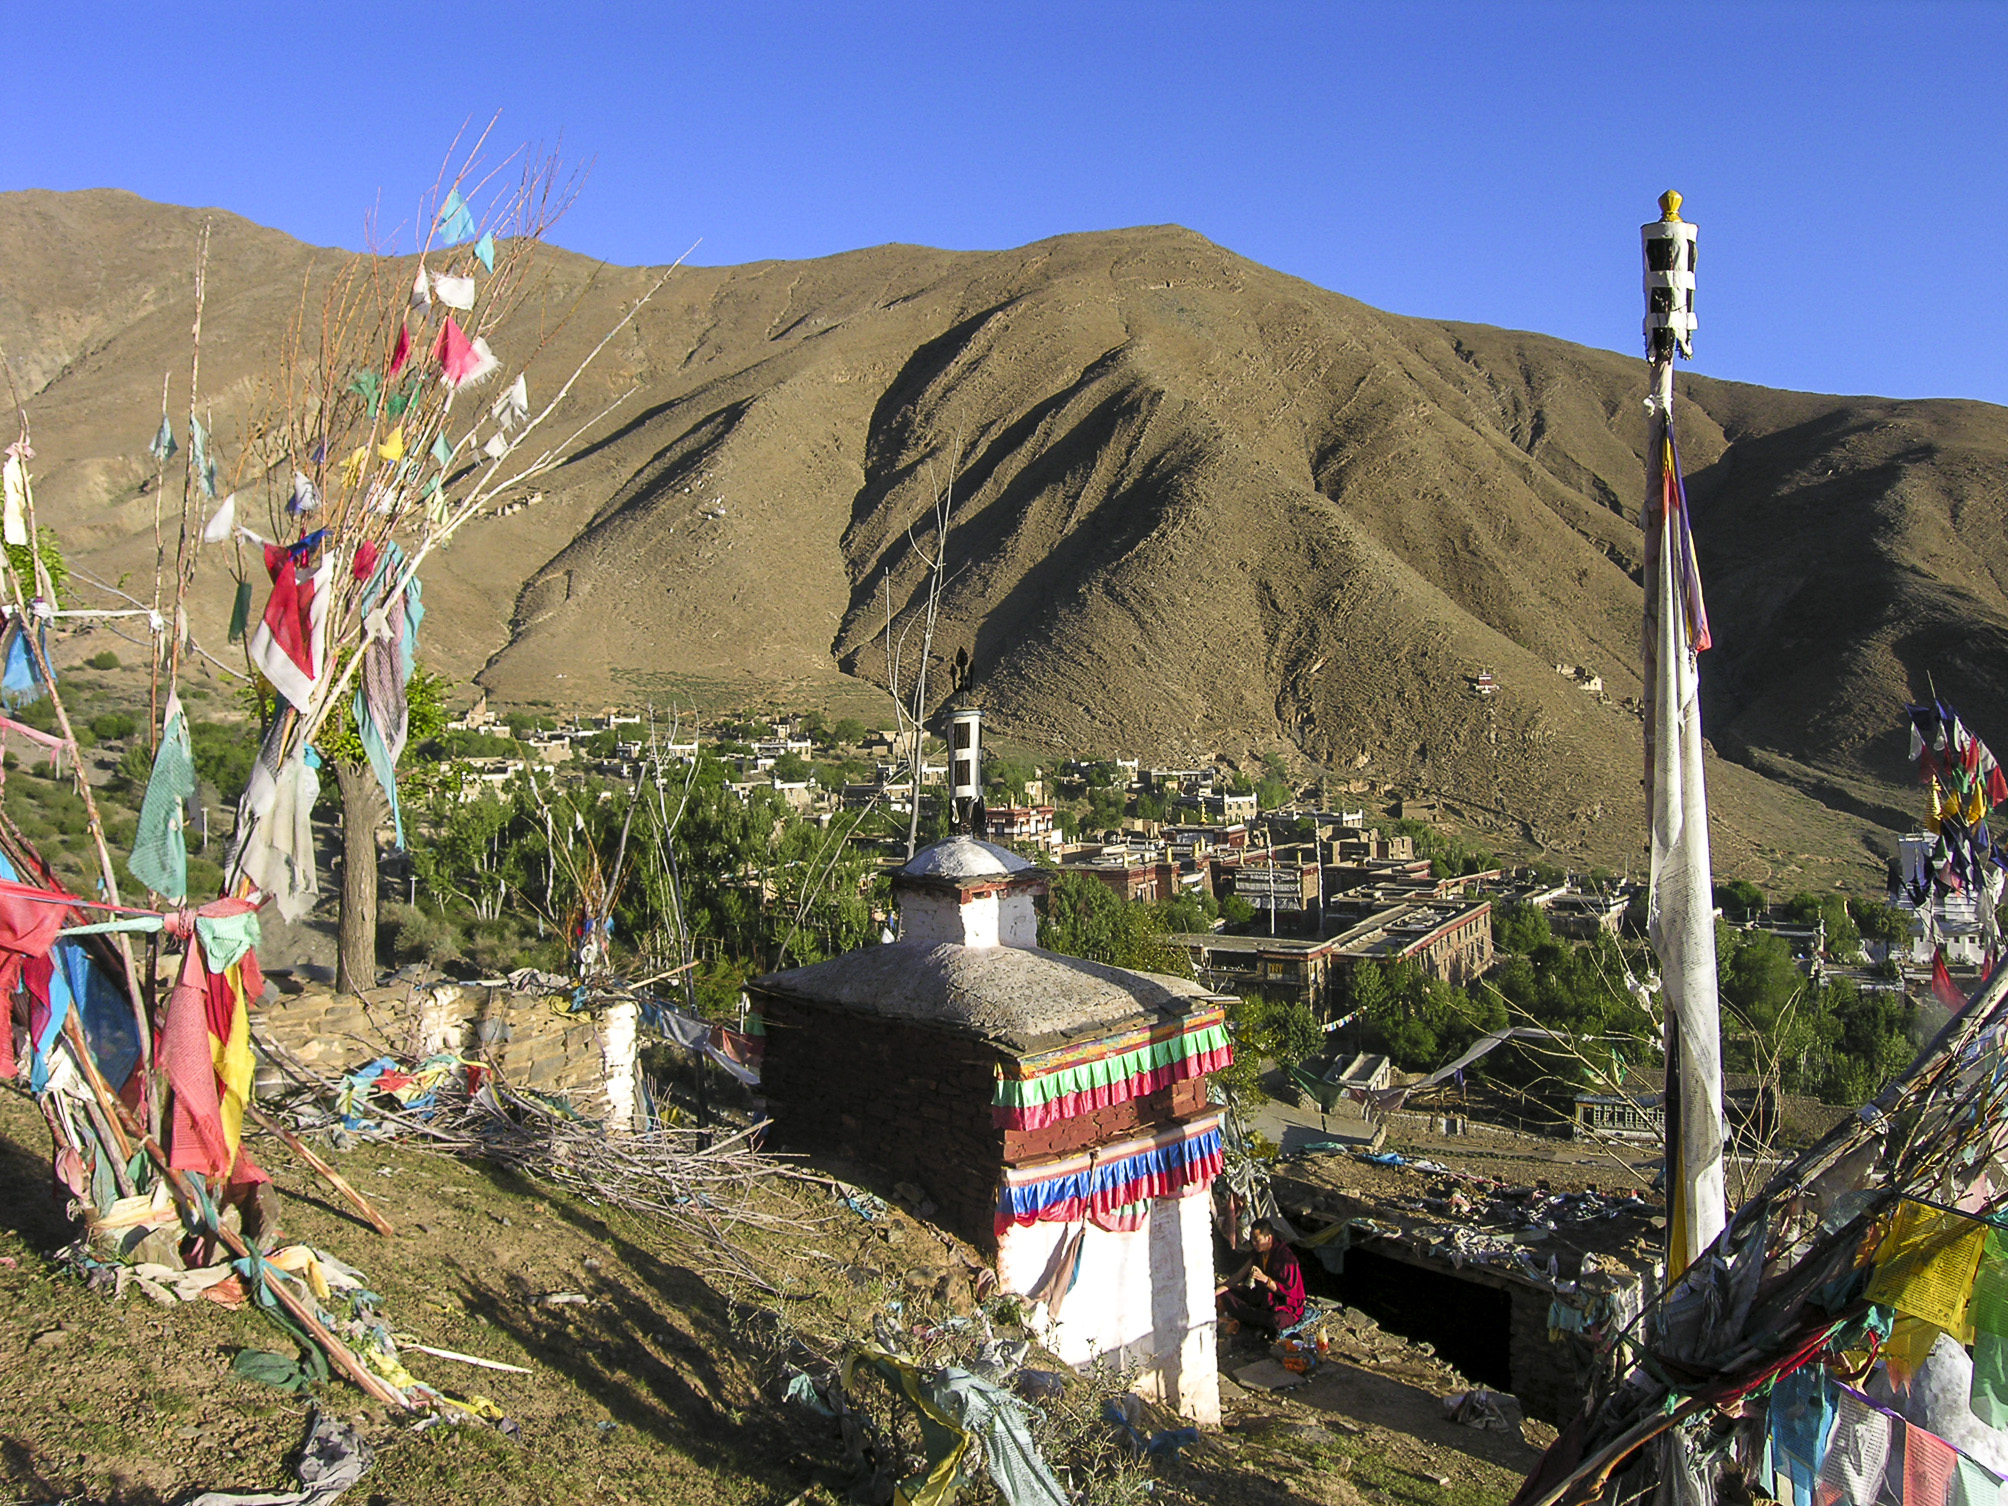 View from above of white structure decorated with colorful banners situated above green mountain valley